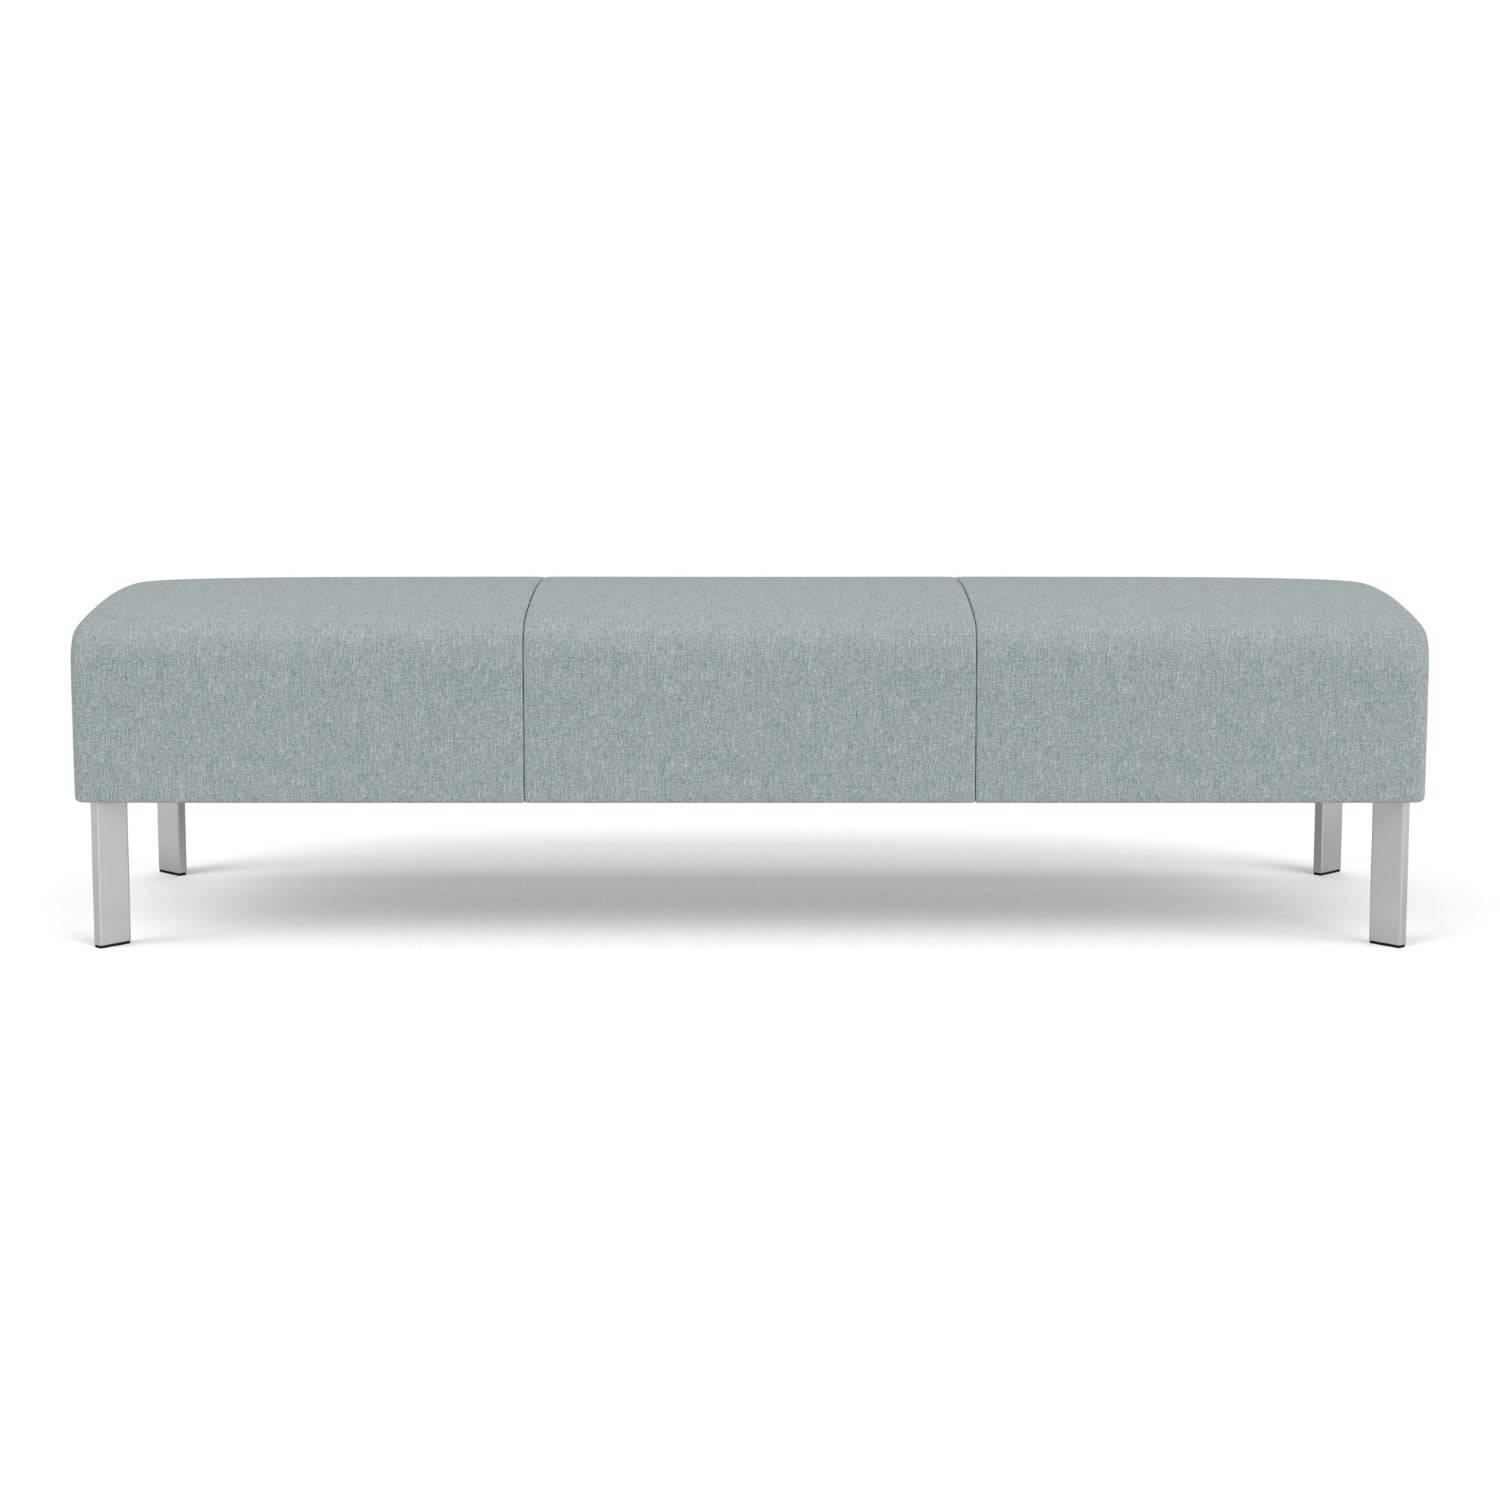 Luxe Collection Reception Seating, 3 Seat Bench, Healthcare Vinyl Upholstery, FREE SHIPPING